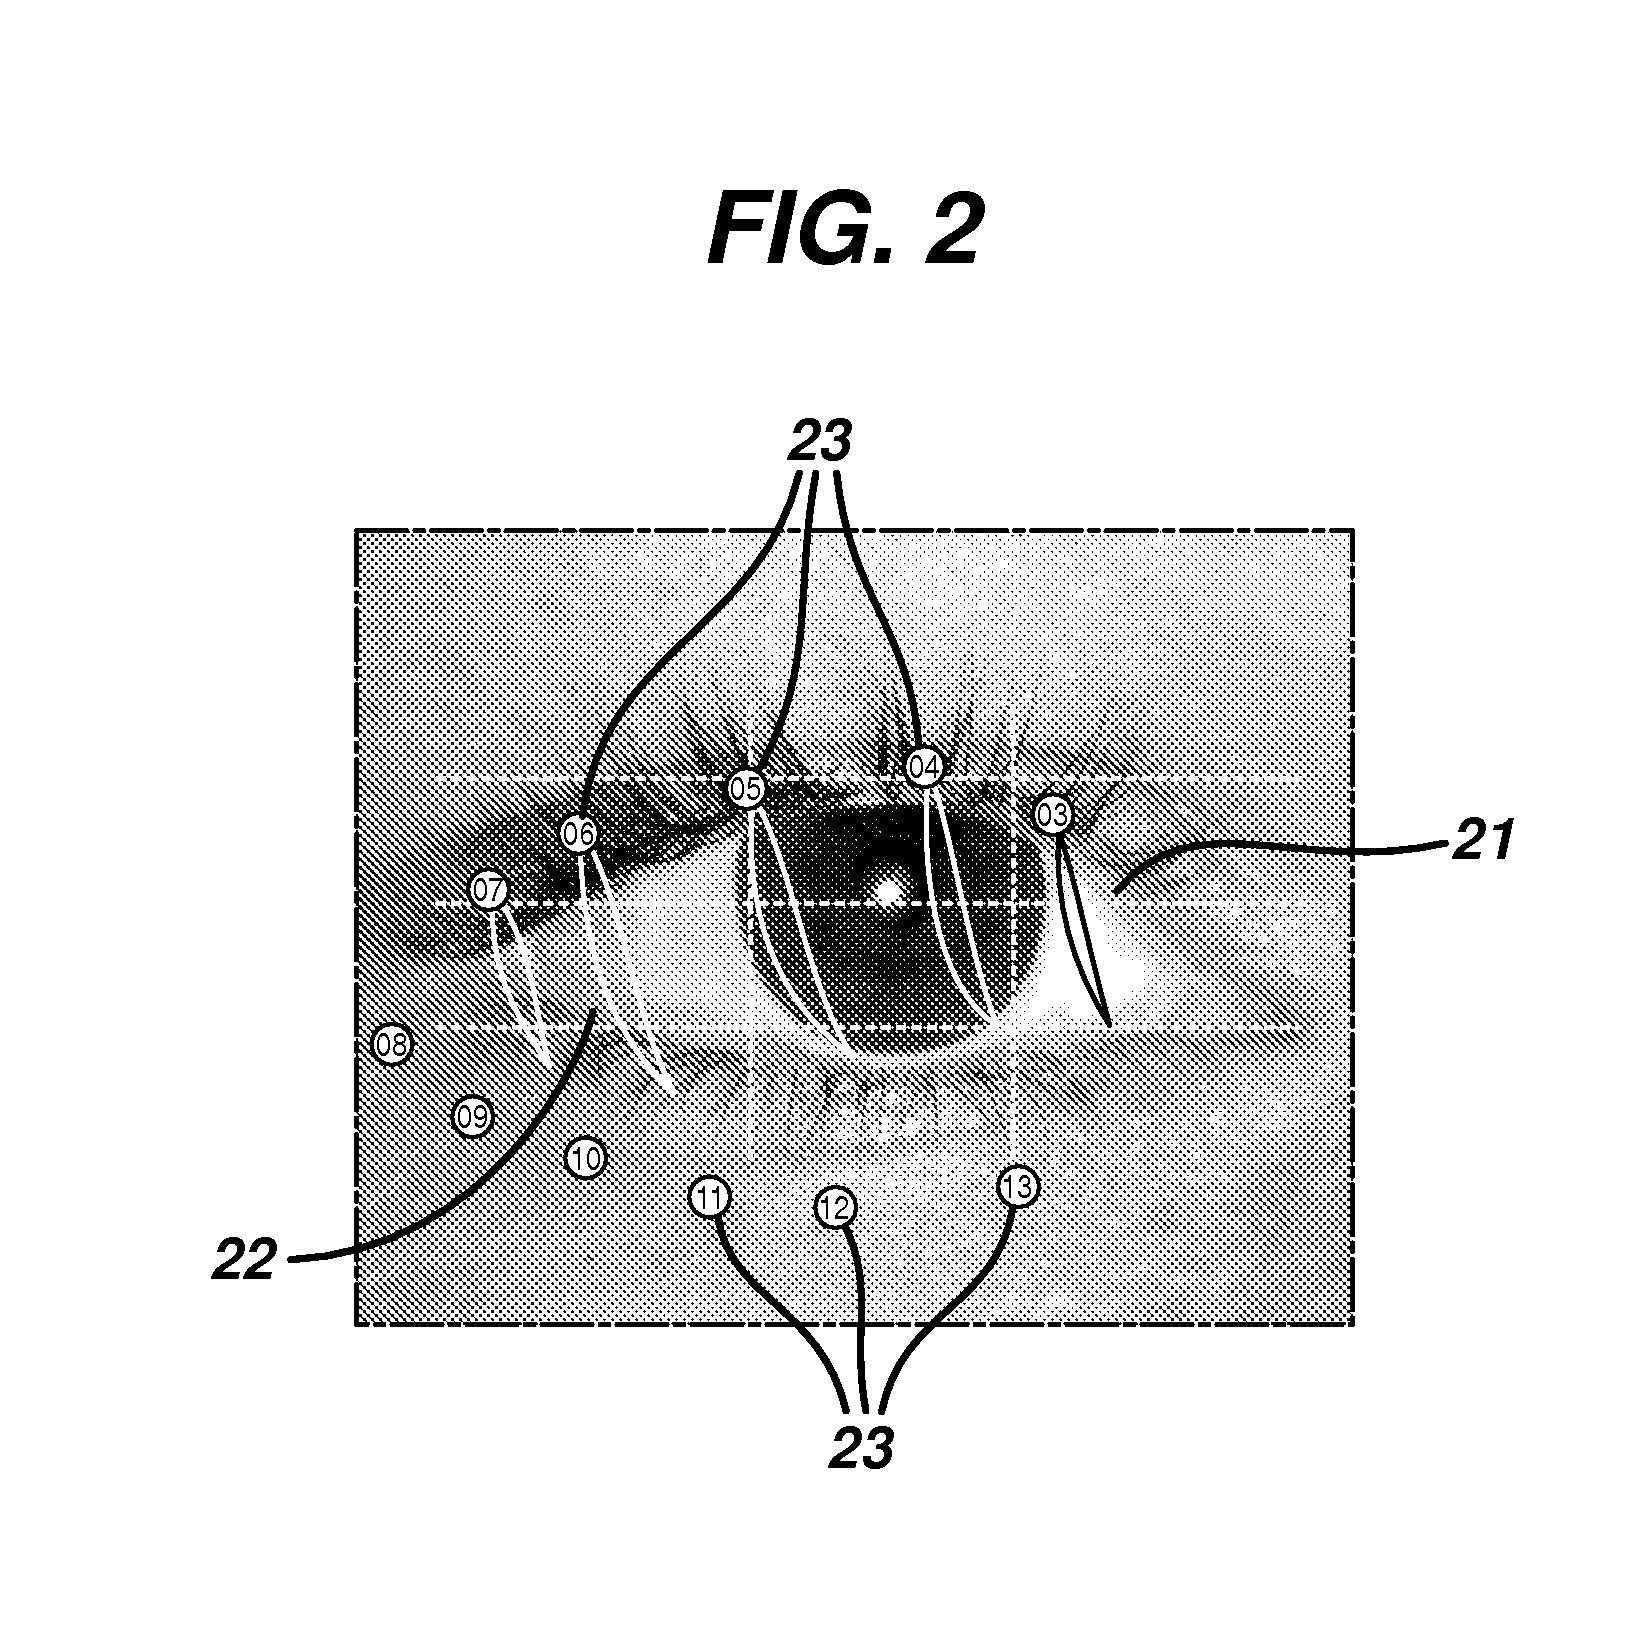 Method for evaluating eyelid movement and contact lens position